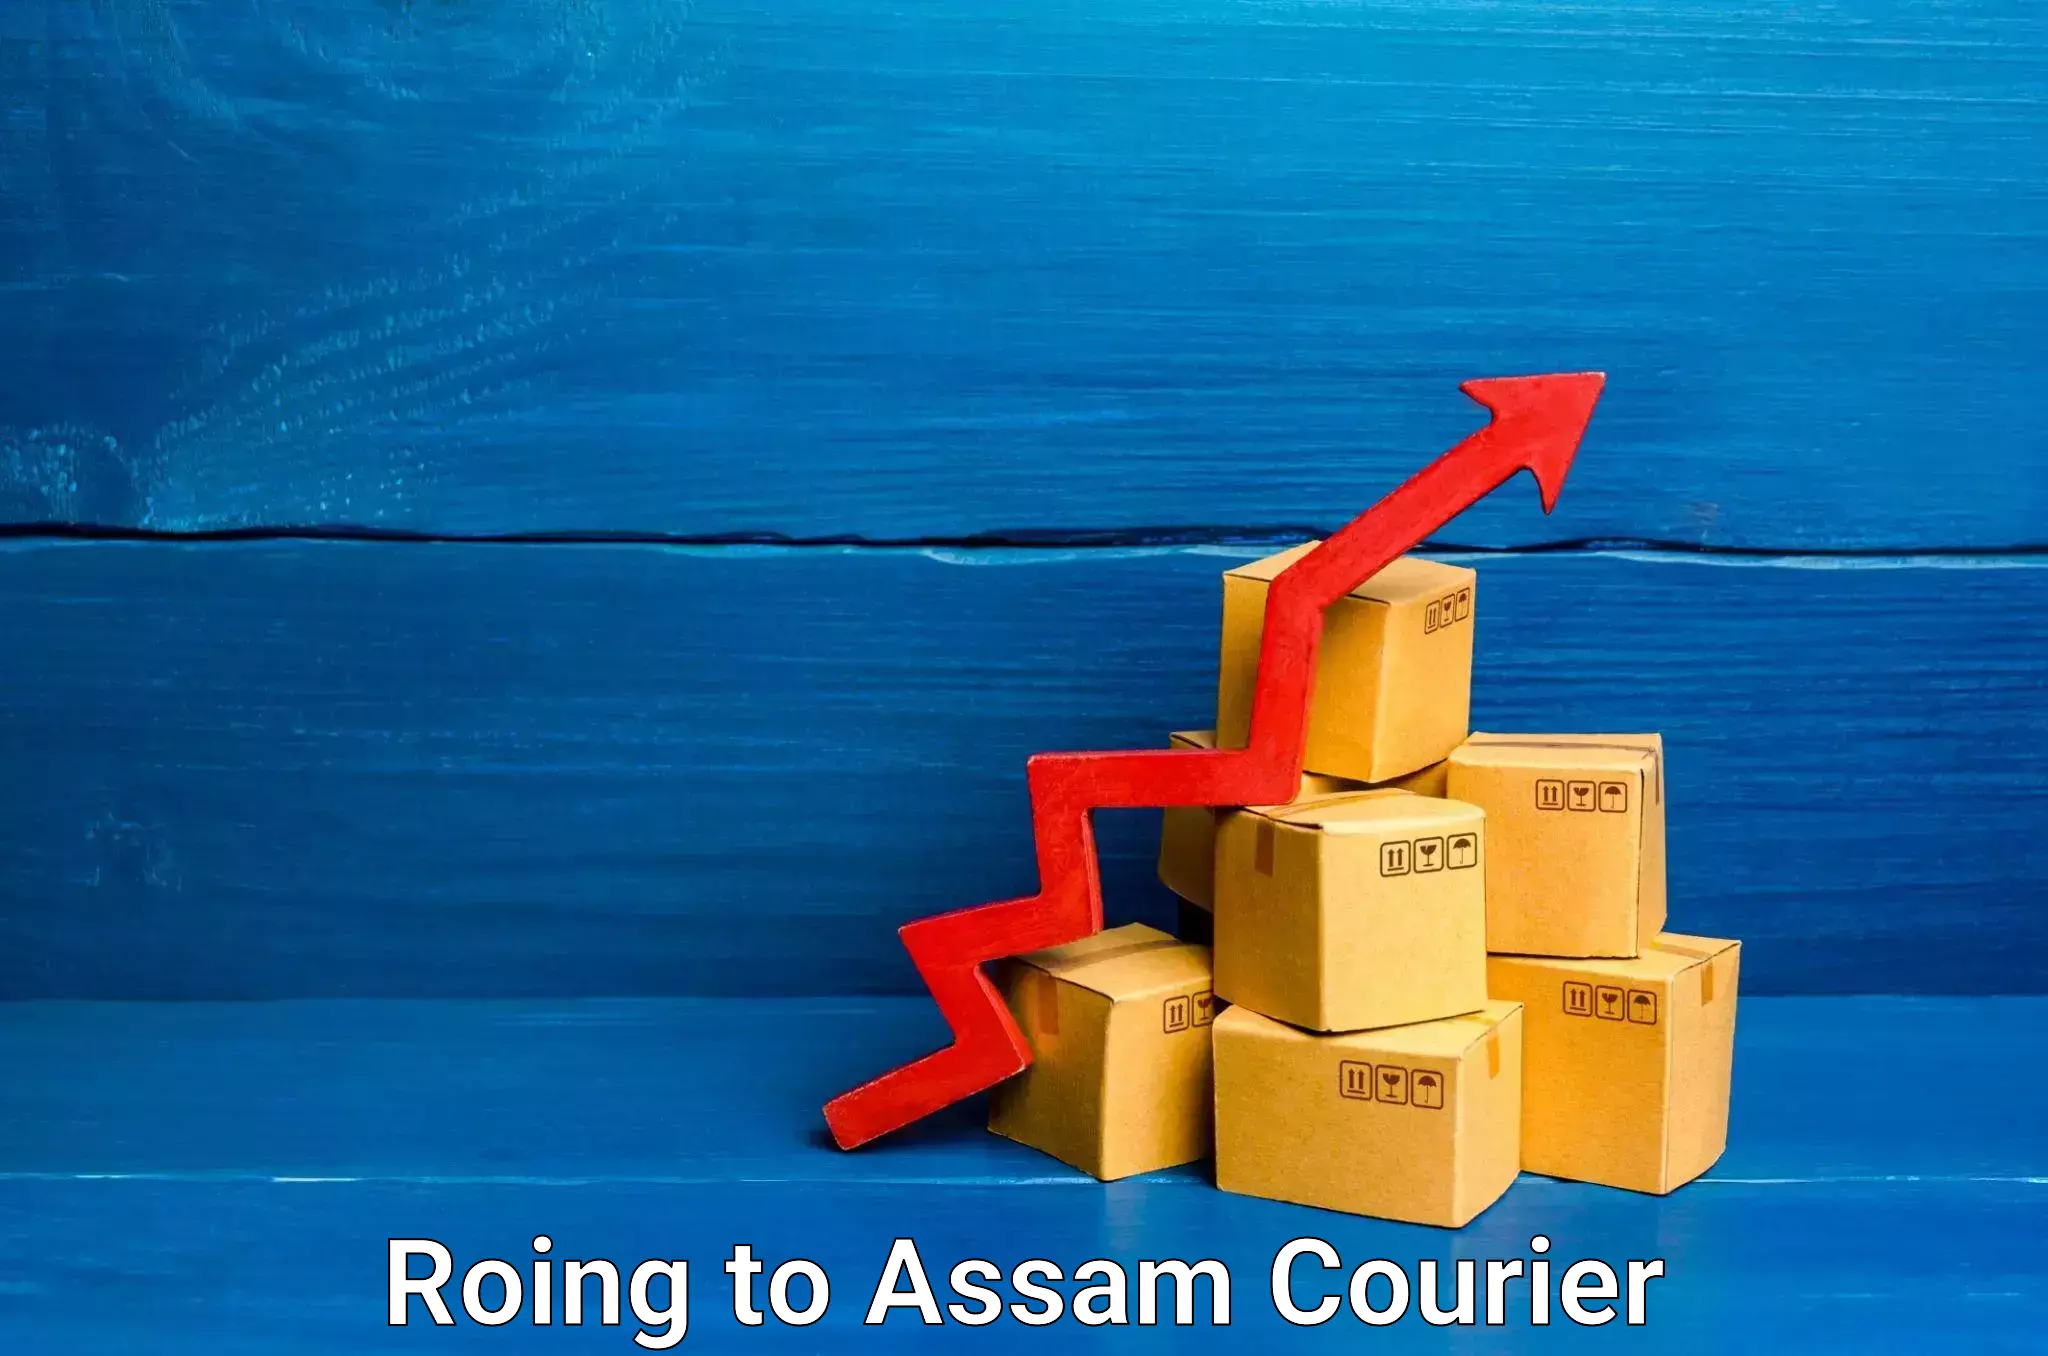 Express postal services Roing to Assam